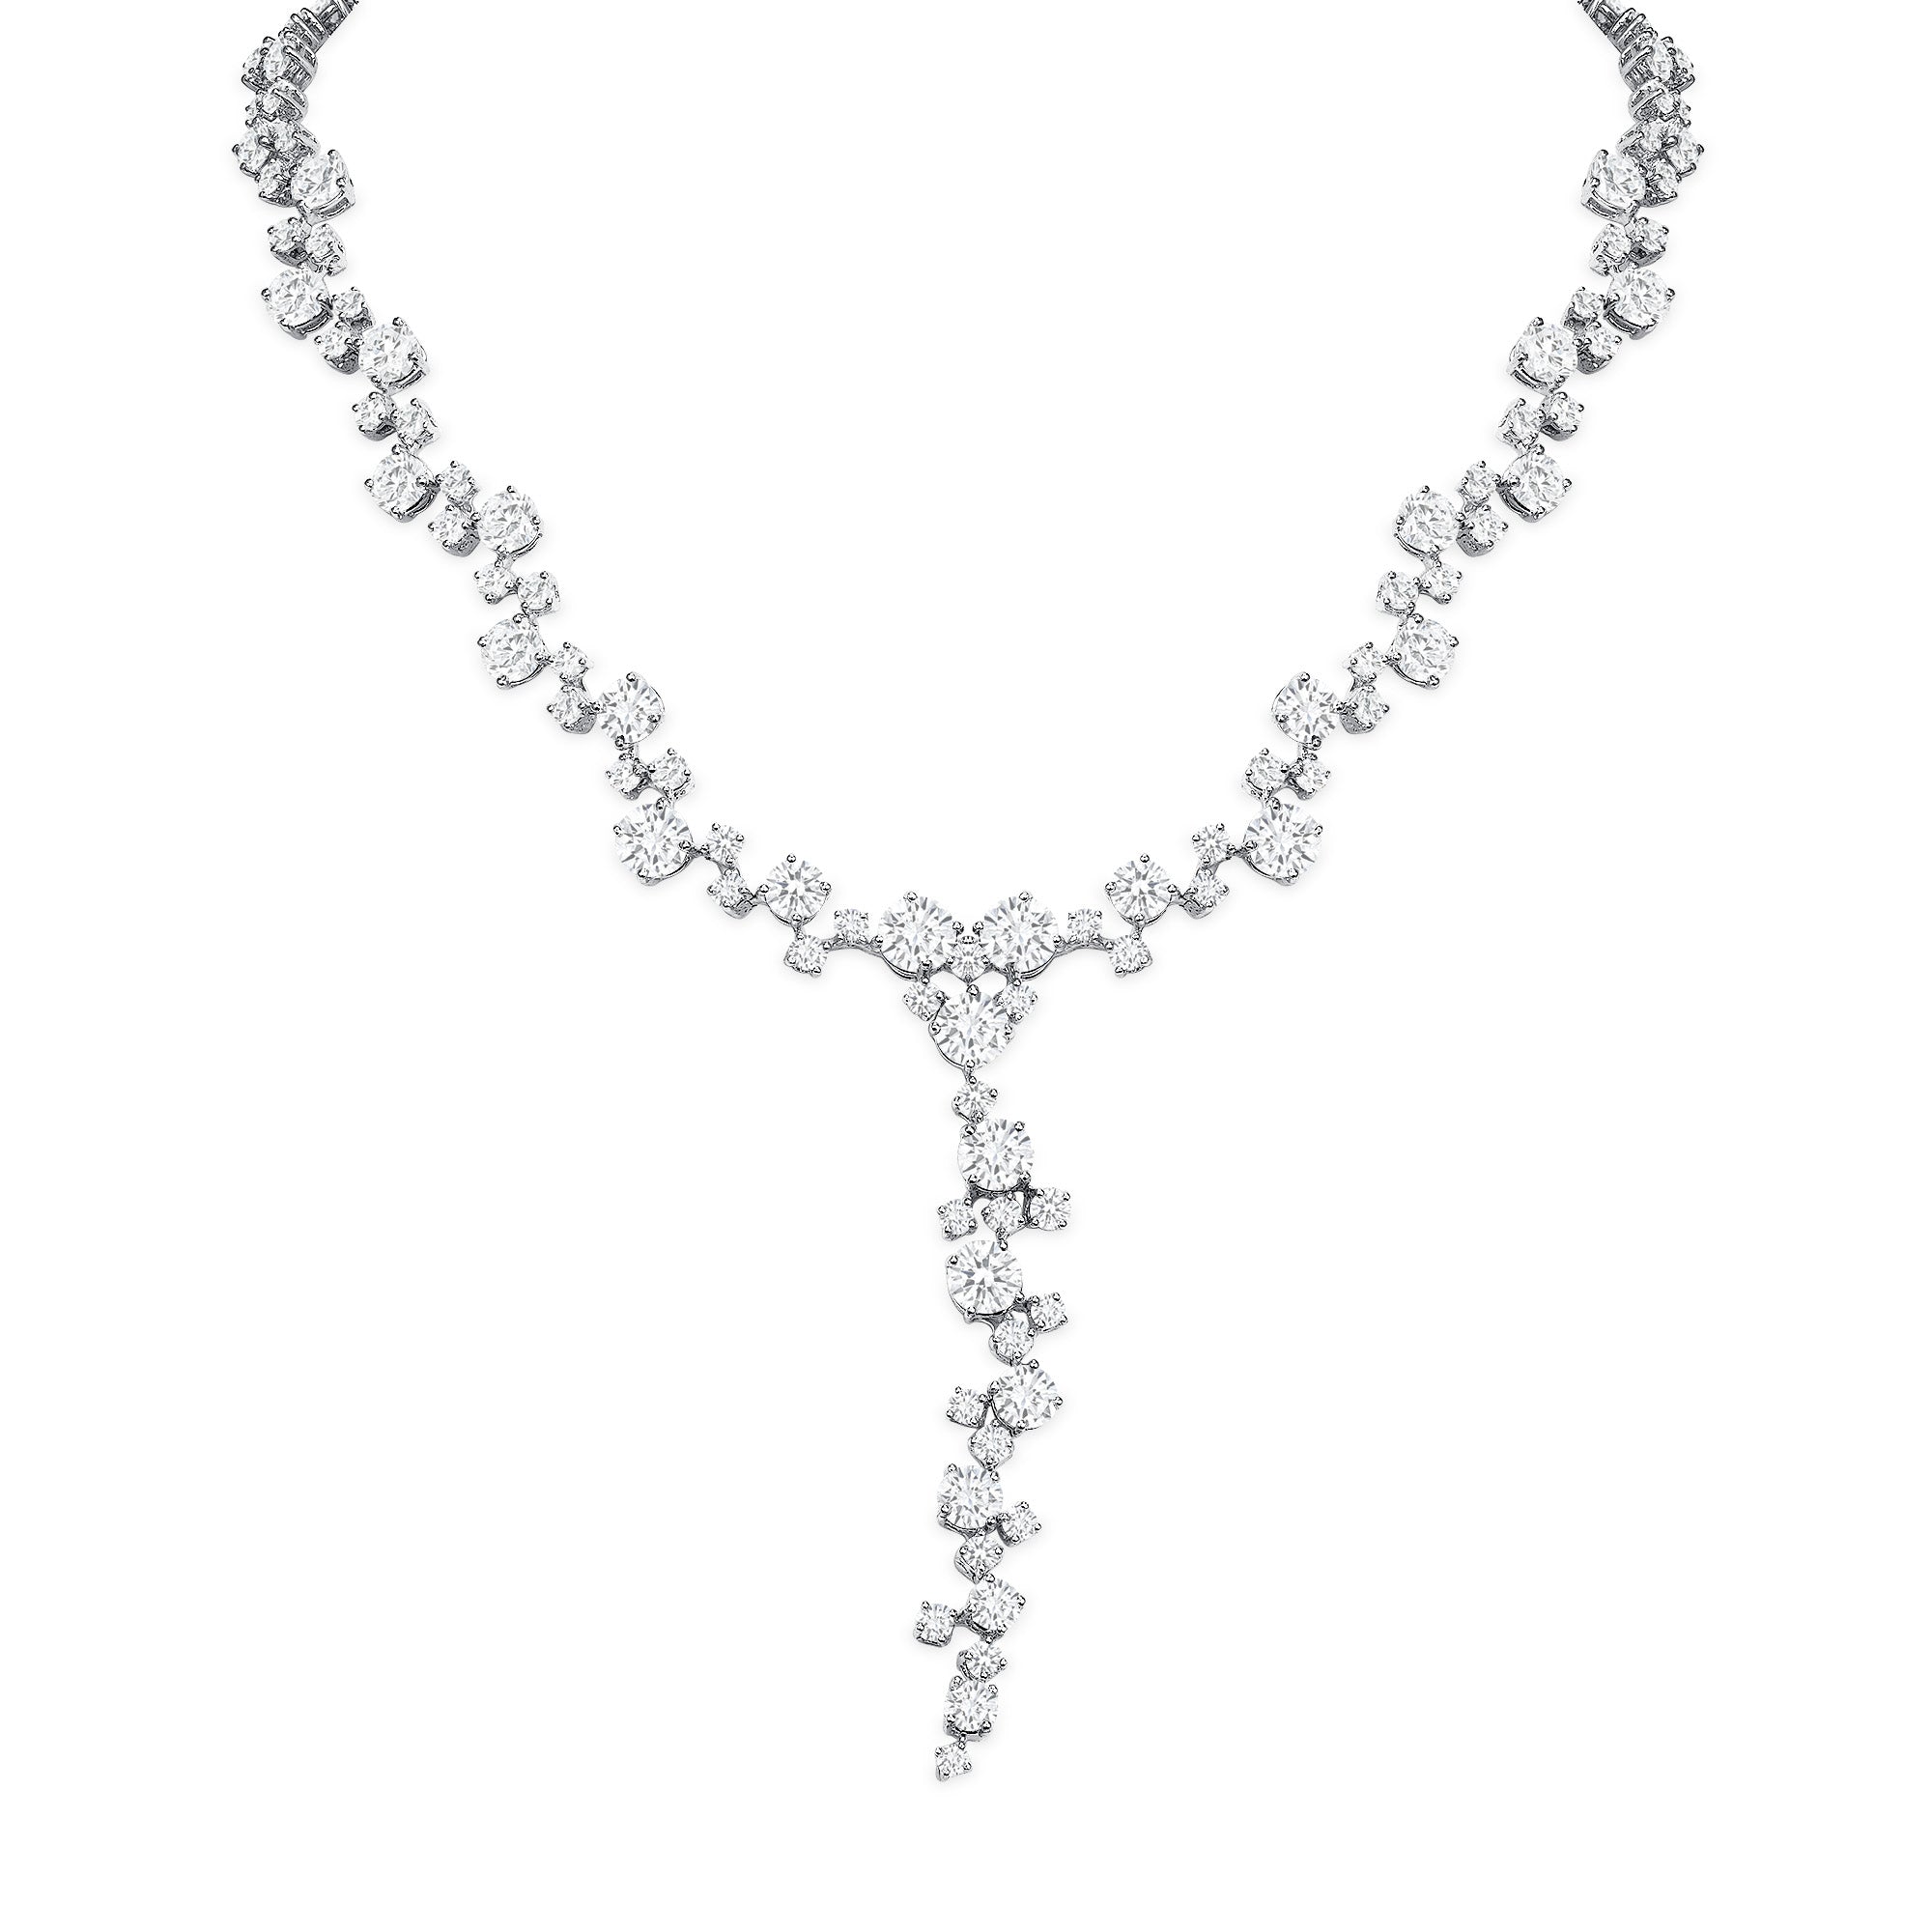 HIGH JEWELRY NECKLACES – YESSAYAN - LA